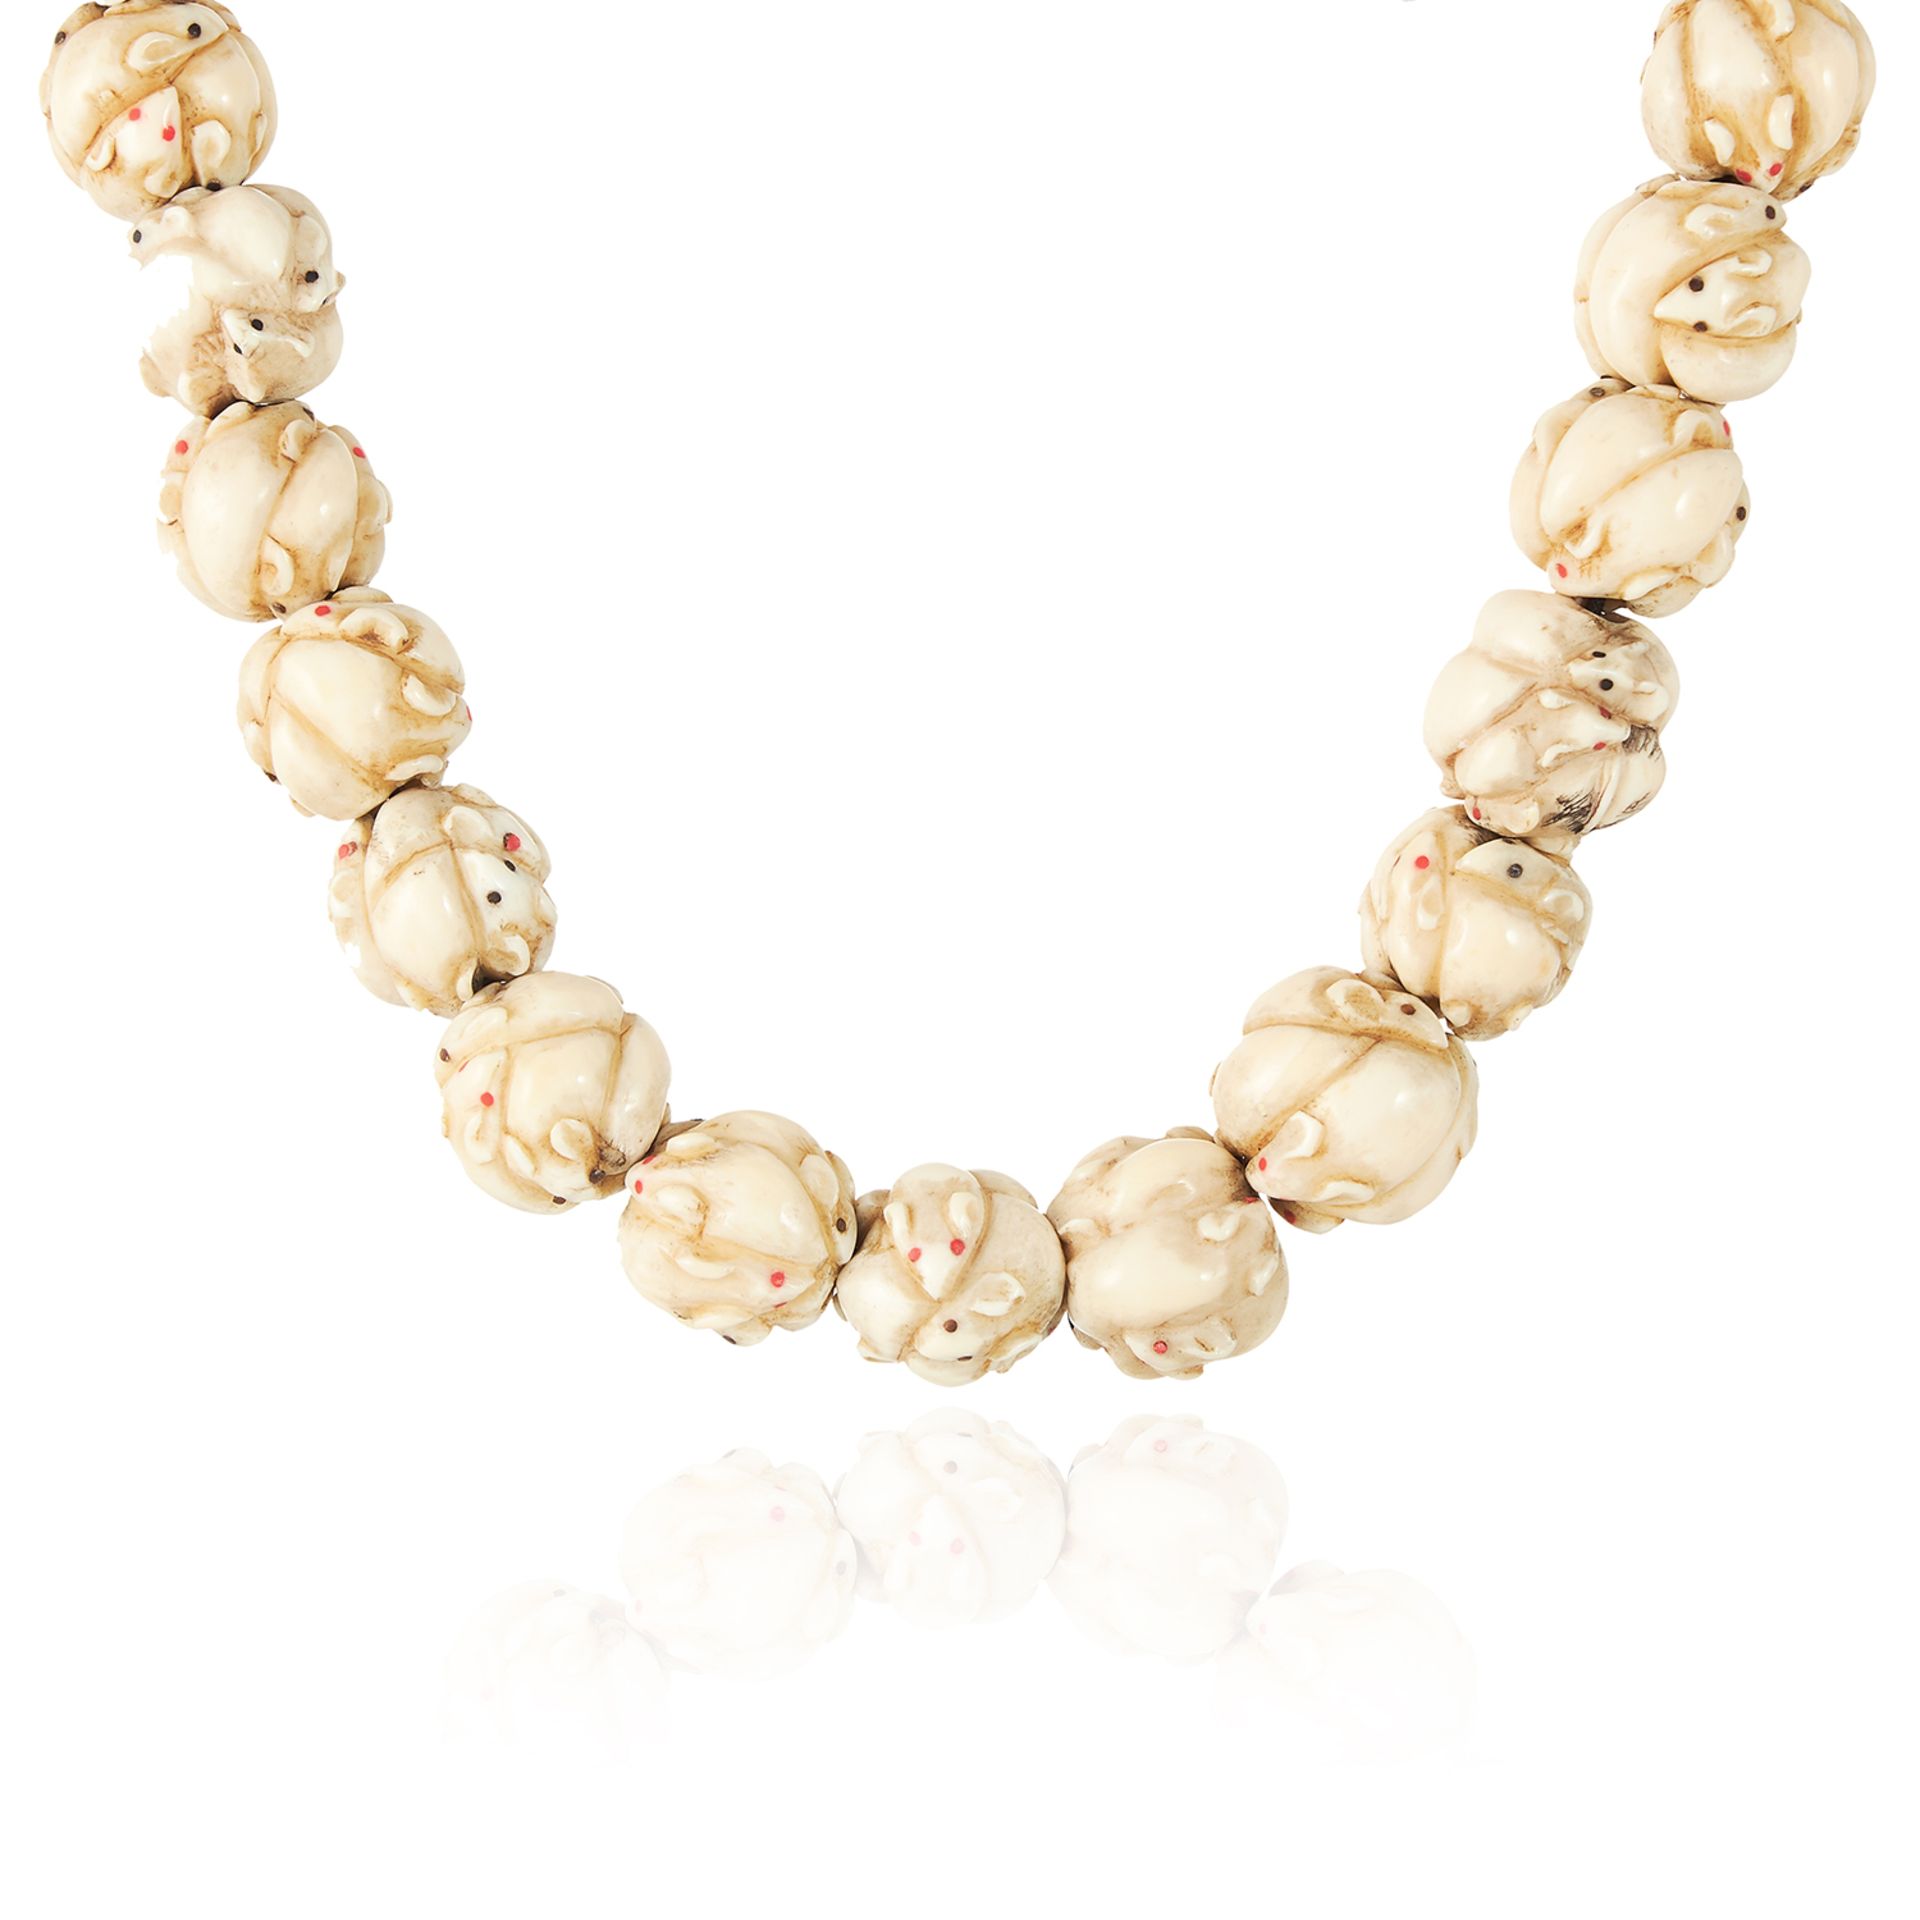 AN ANTIQUE JAPANESE OJIME BEAD NECKLACE, 19TH CENTURY comprising a single row of thirty carved ivory